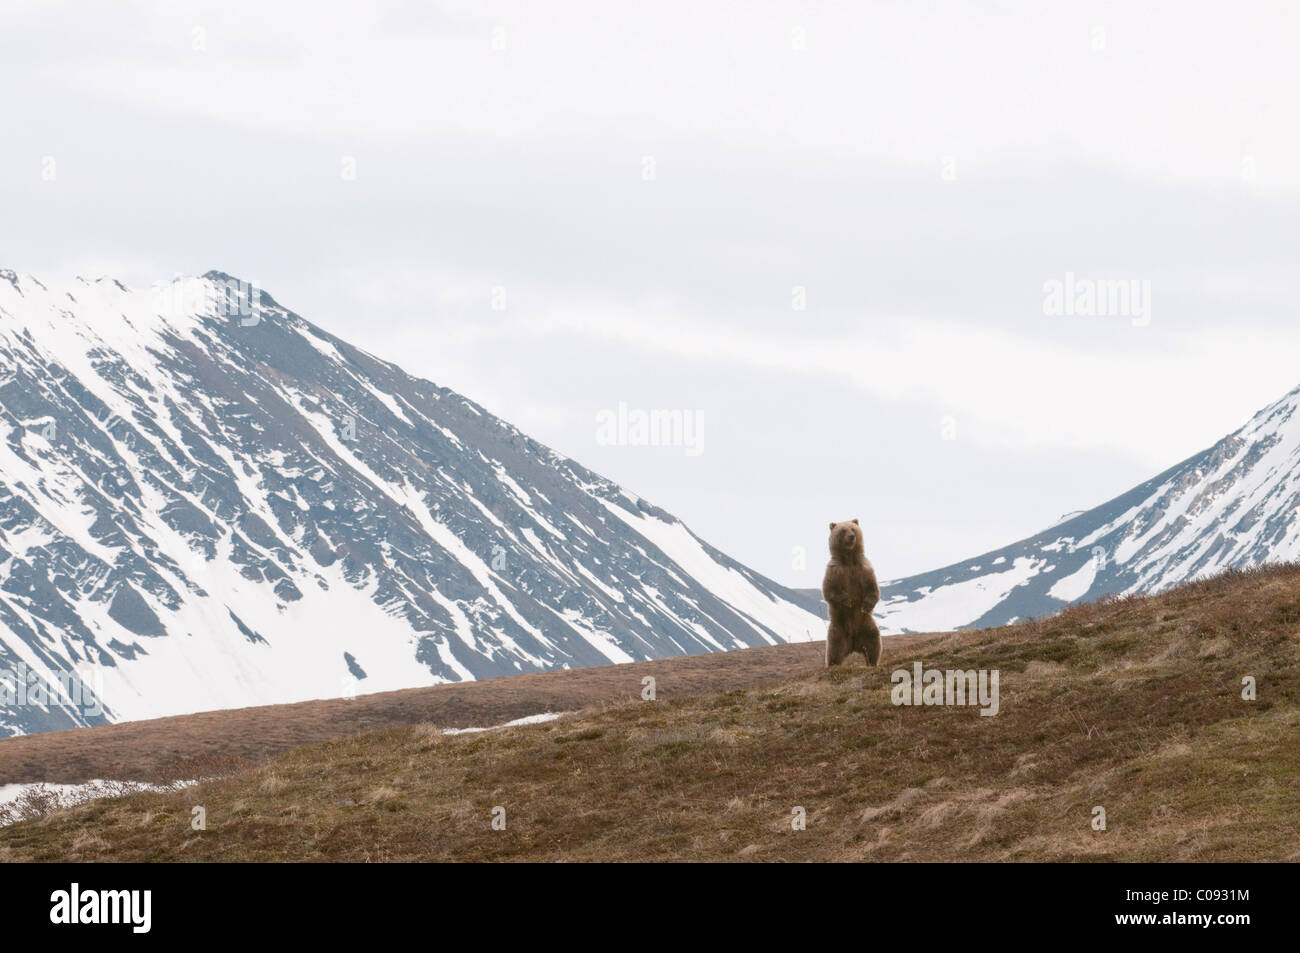 An adult male Grizzly bear surveys terrain while standing on hind feet in Sable Pass, Denali National Park and Preserve, Alaska Stock Photo